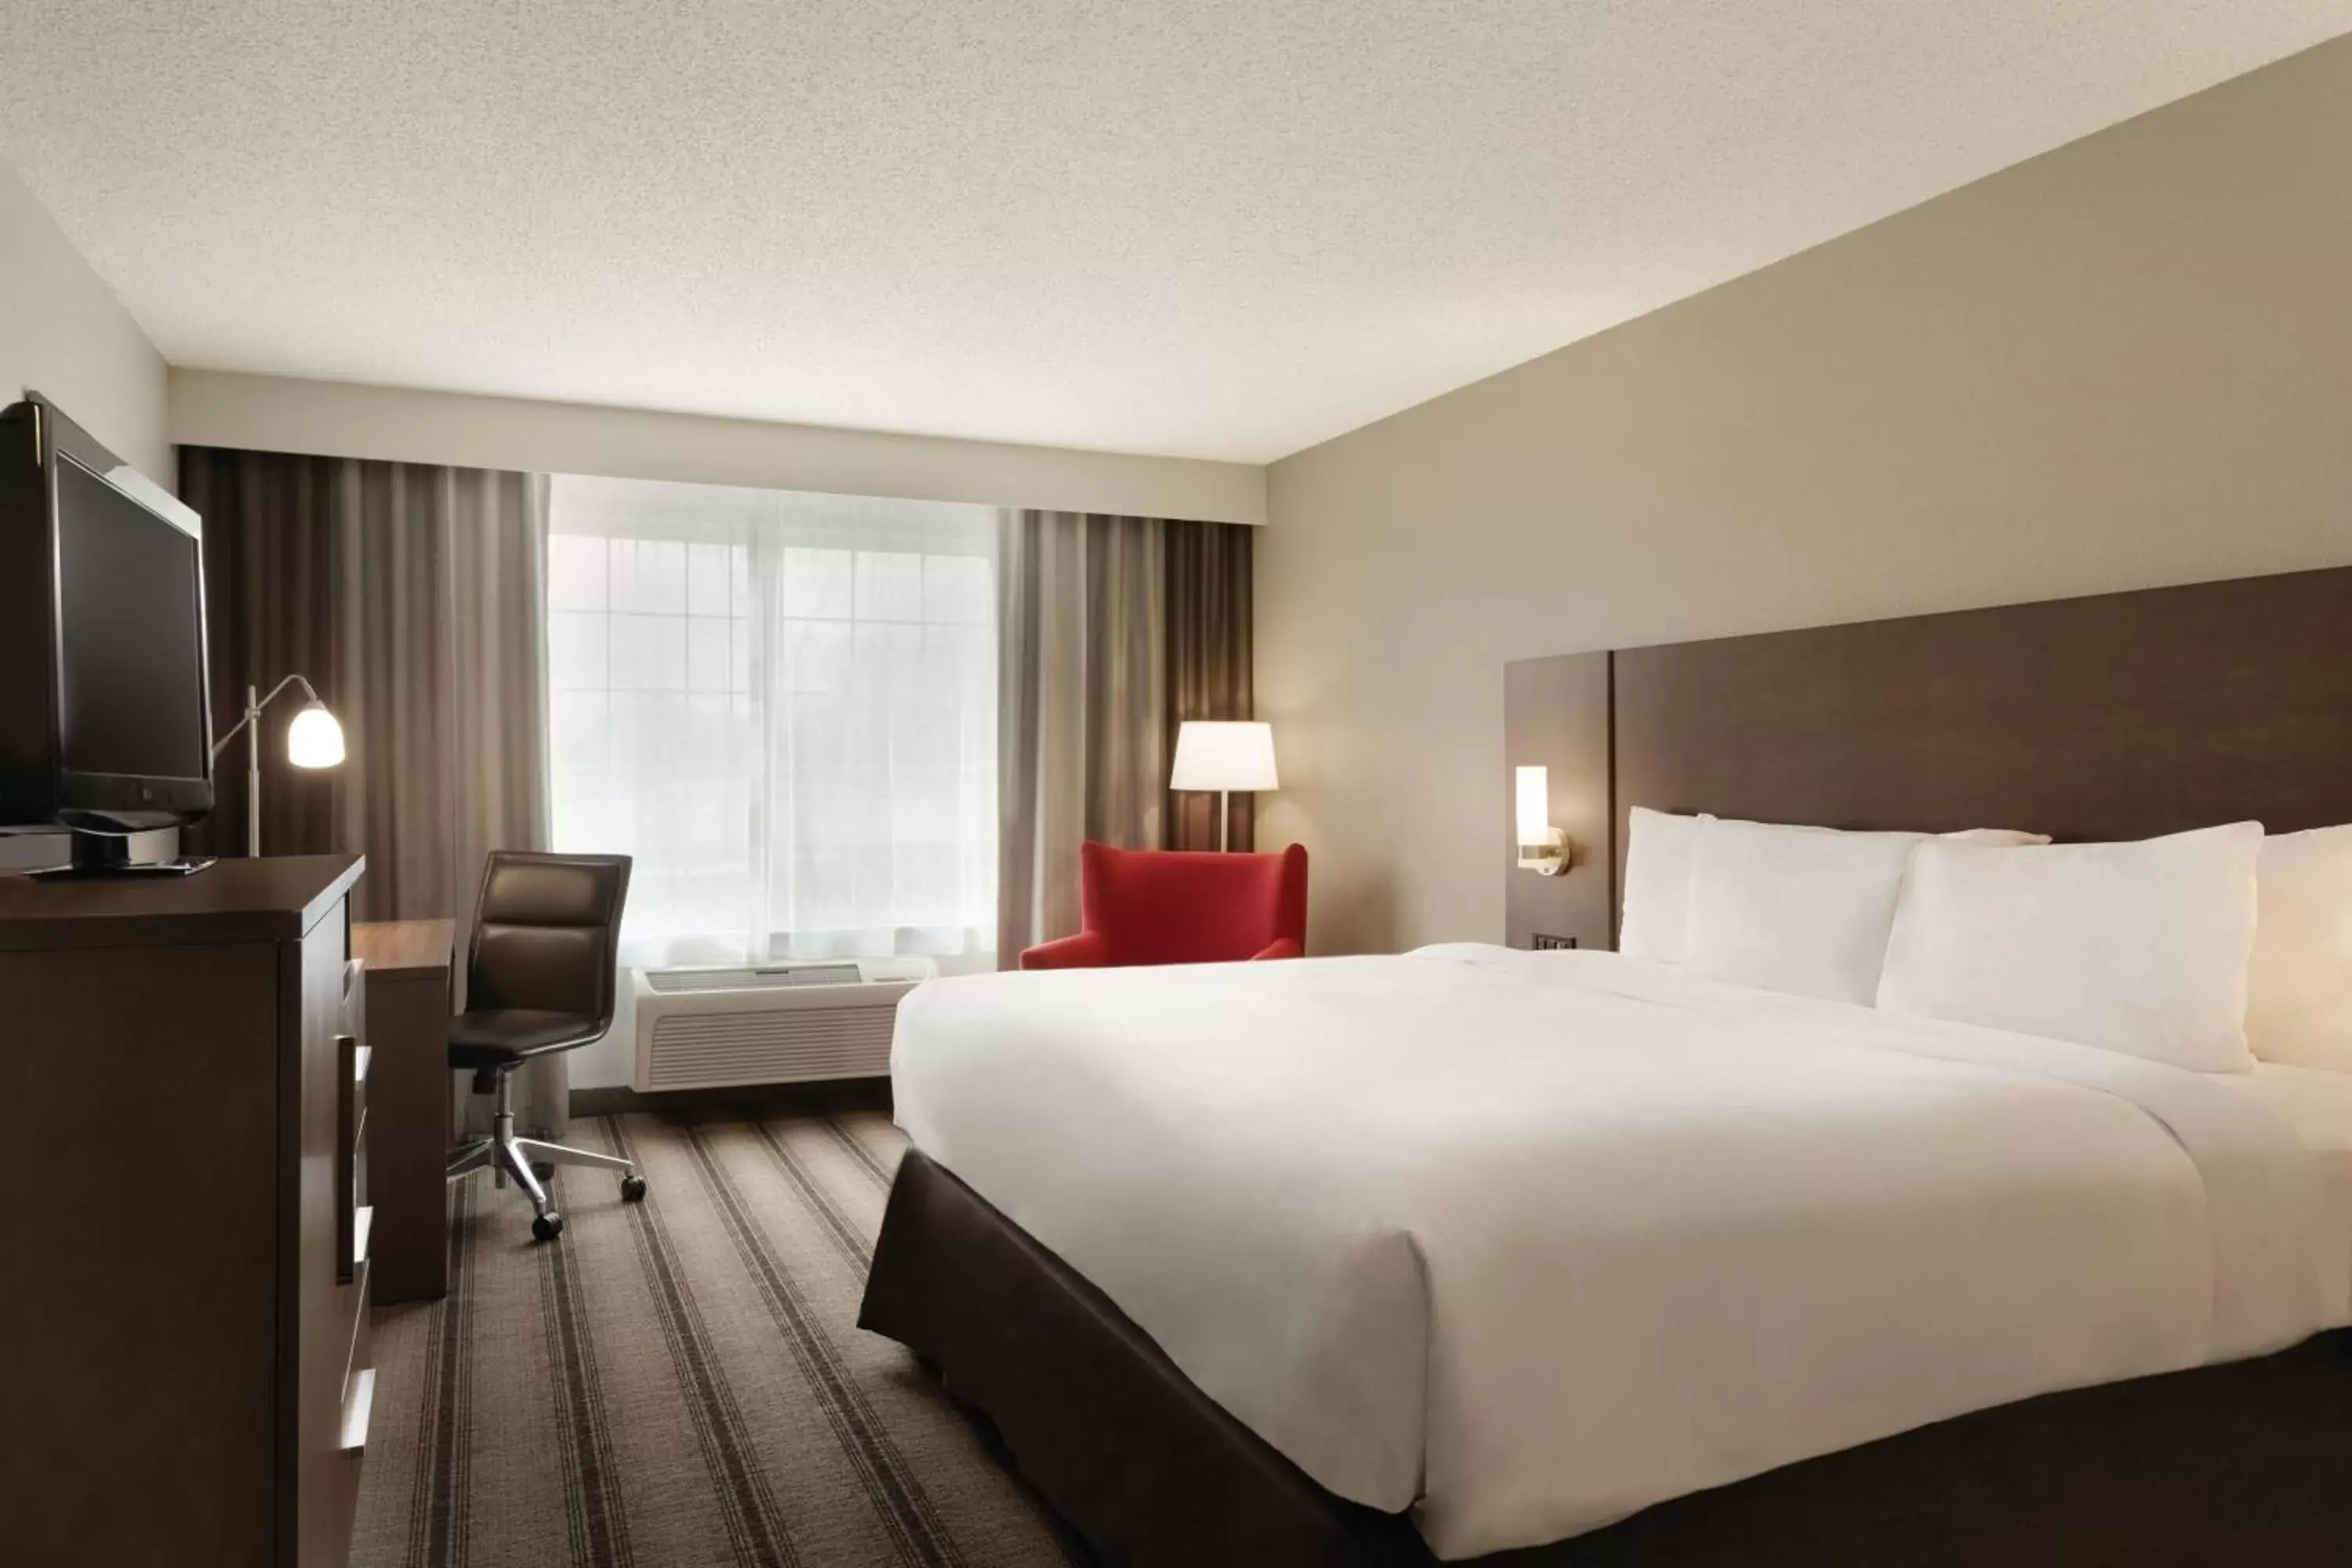 Bedroom in Country Inn & Suites by Radisson, Indianapolis Airport South, IN